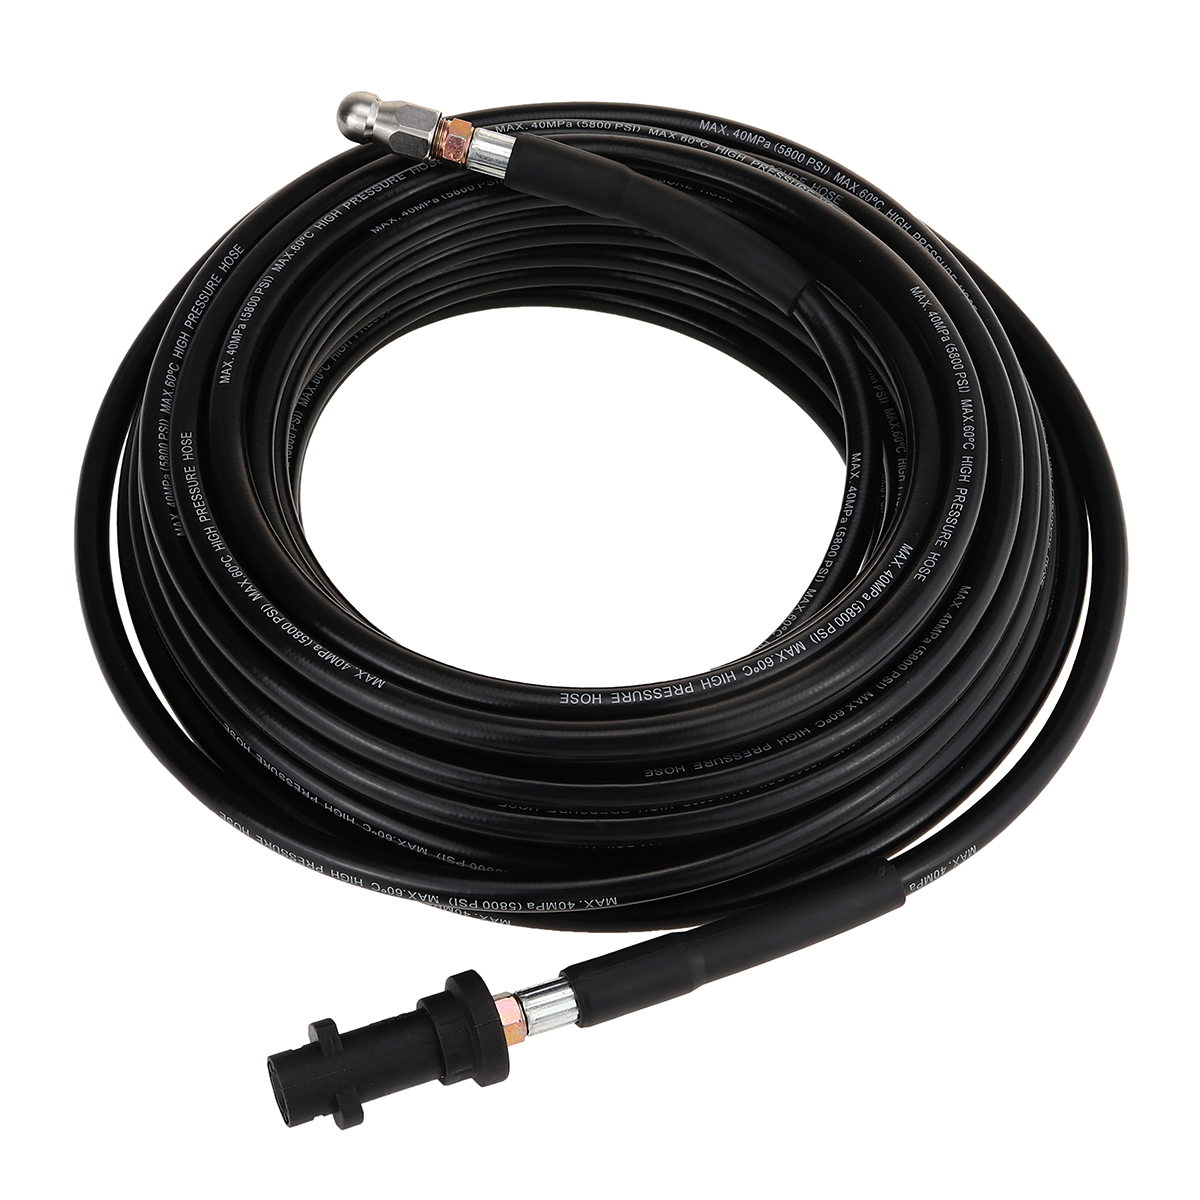 5-20M-Sewer-Jet-Pressure-Washer-Hose-with-Button-Nose-Sewer-Jetter-Nozzle-1720900-3